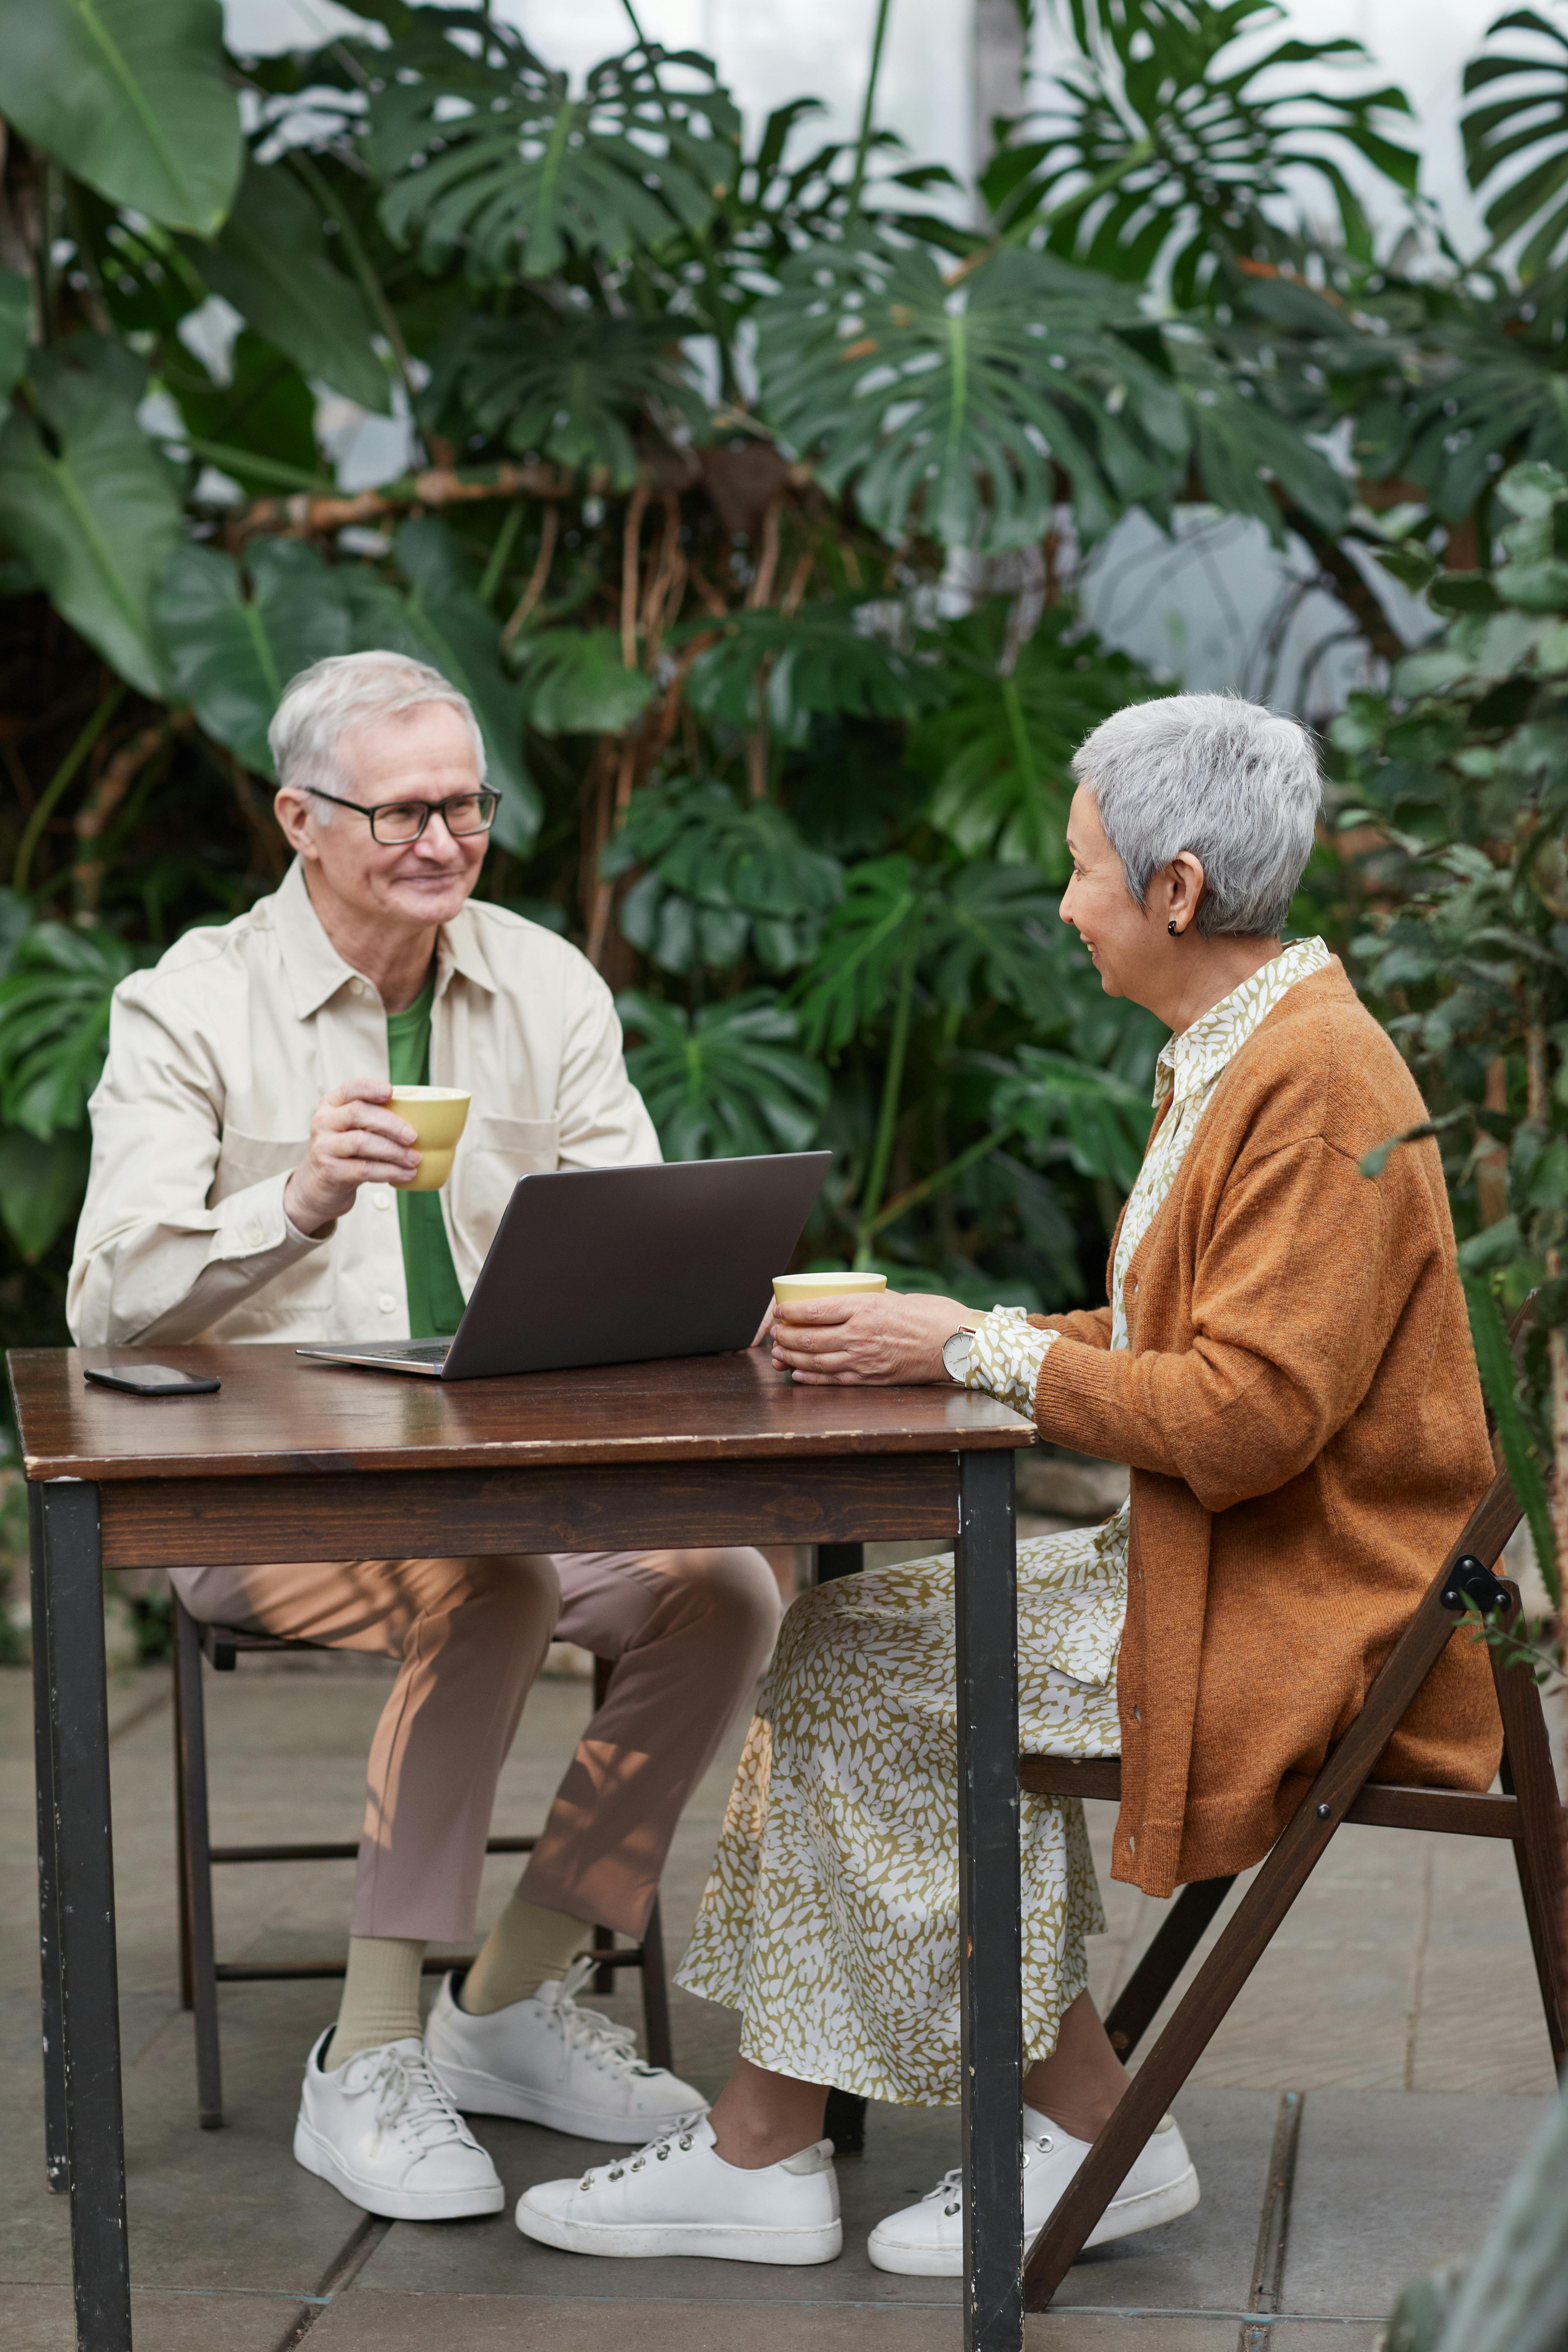 A couple flirting and smiling while enjoying beverages with a laptop visible | Source: Pexels